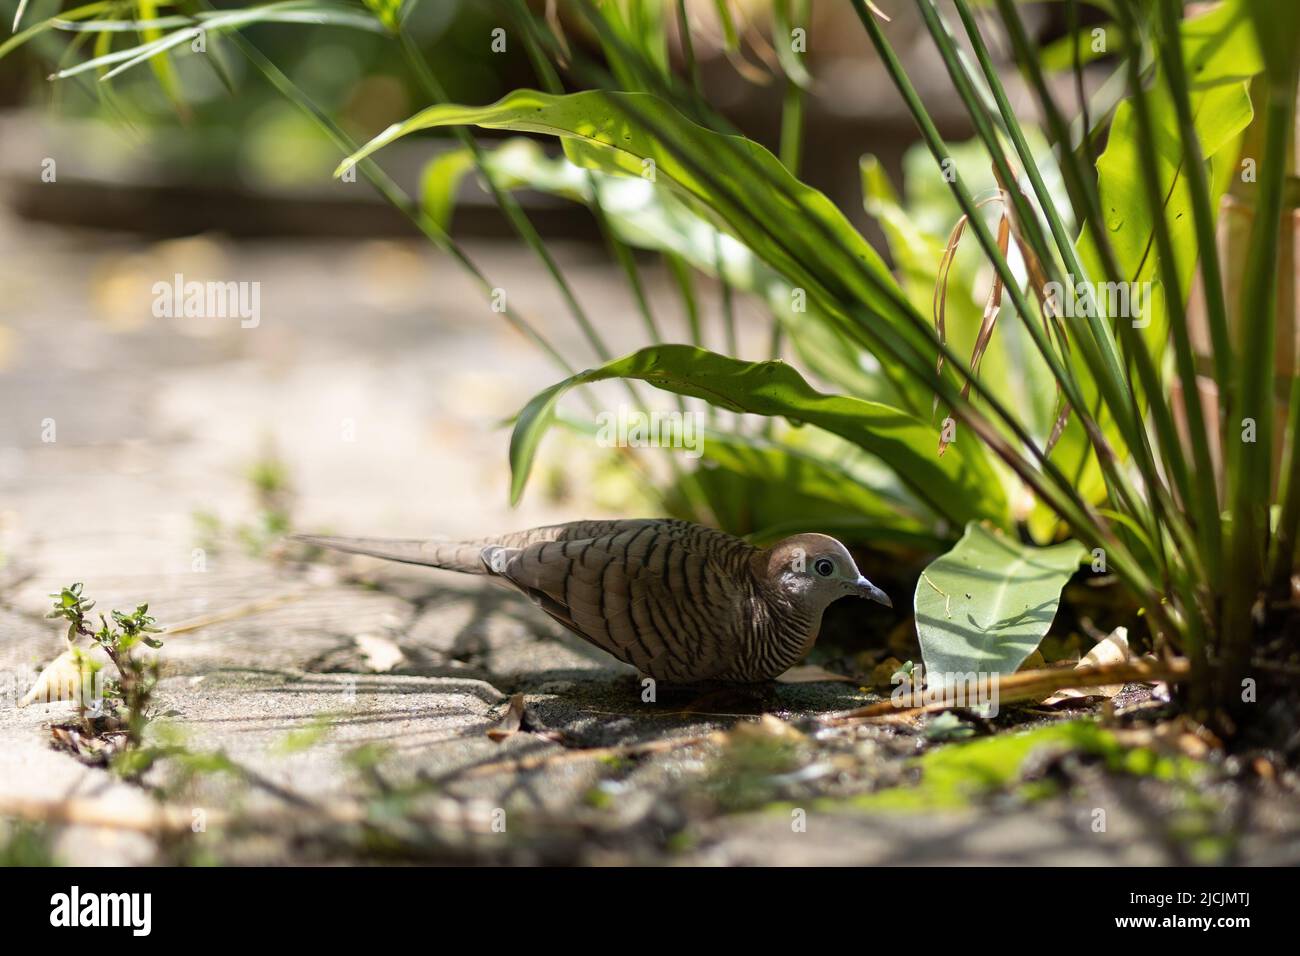 A close-up zebra dove was resting under a tree. Stock Photo